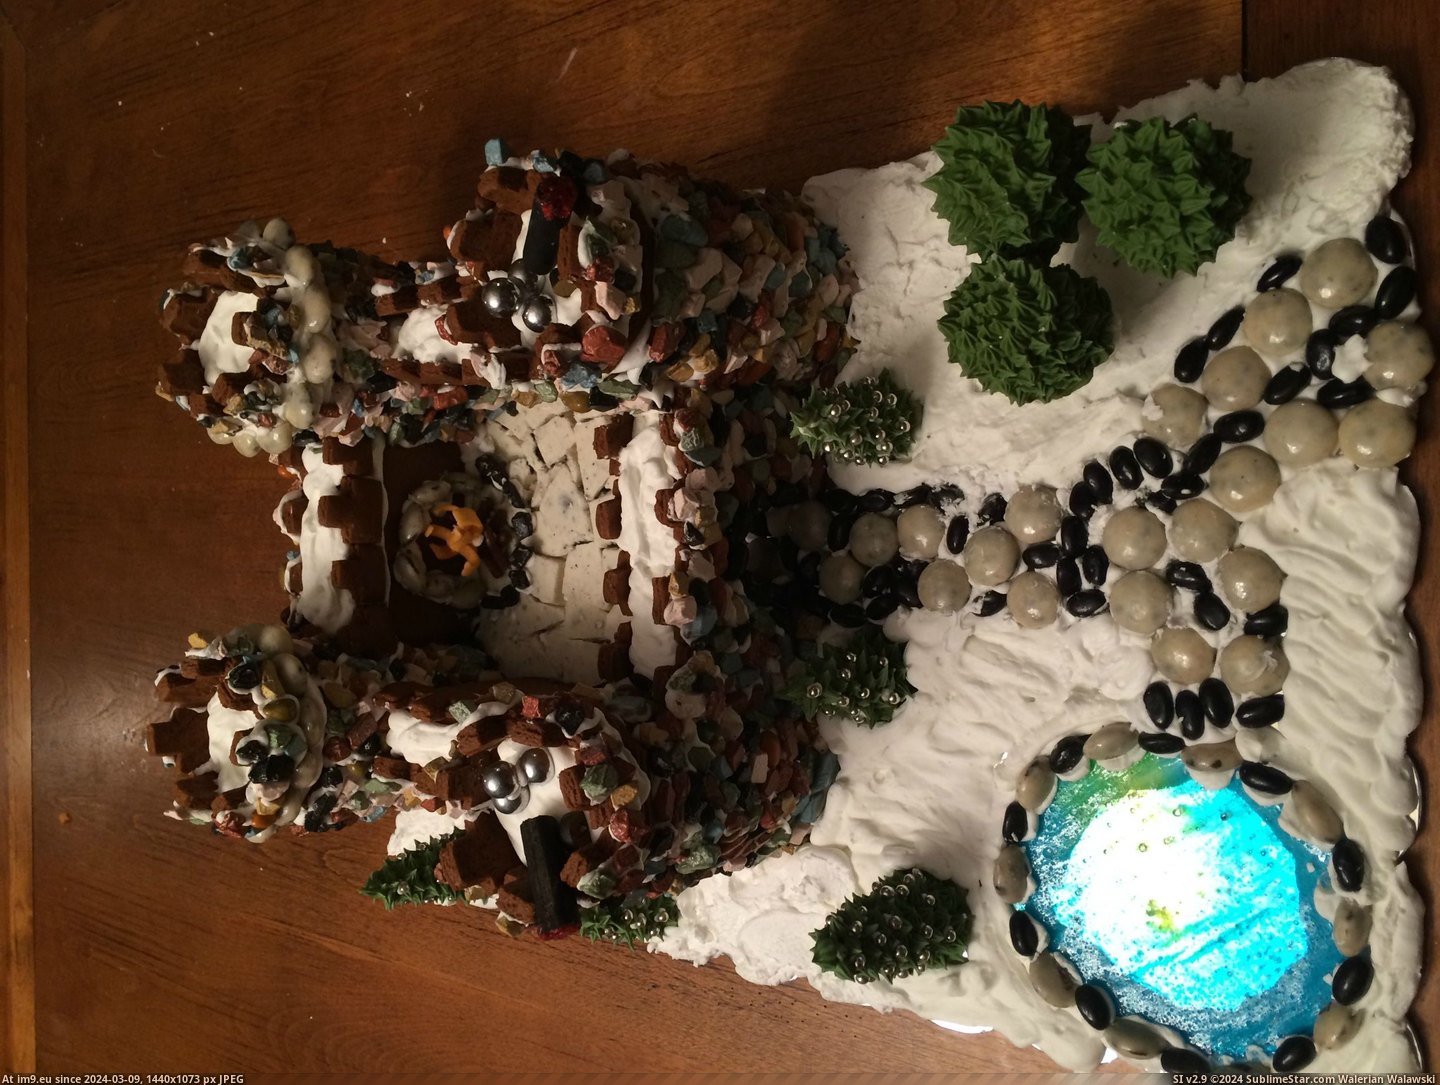 #Husband #Get #Our #Divorced #Collaborated #Project #Gingerbread #Success [Pics] My husband and I collaborated on our first gingerbread project and didn't get divorced...success! 5 Pic. (Изображение из альбом My r/PICS favs))